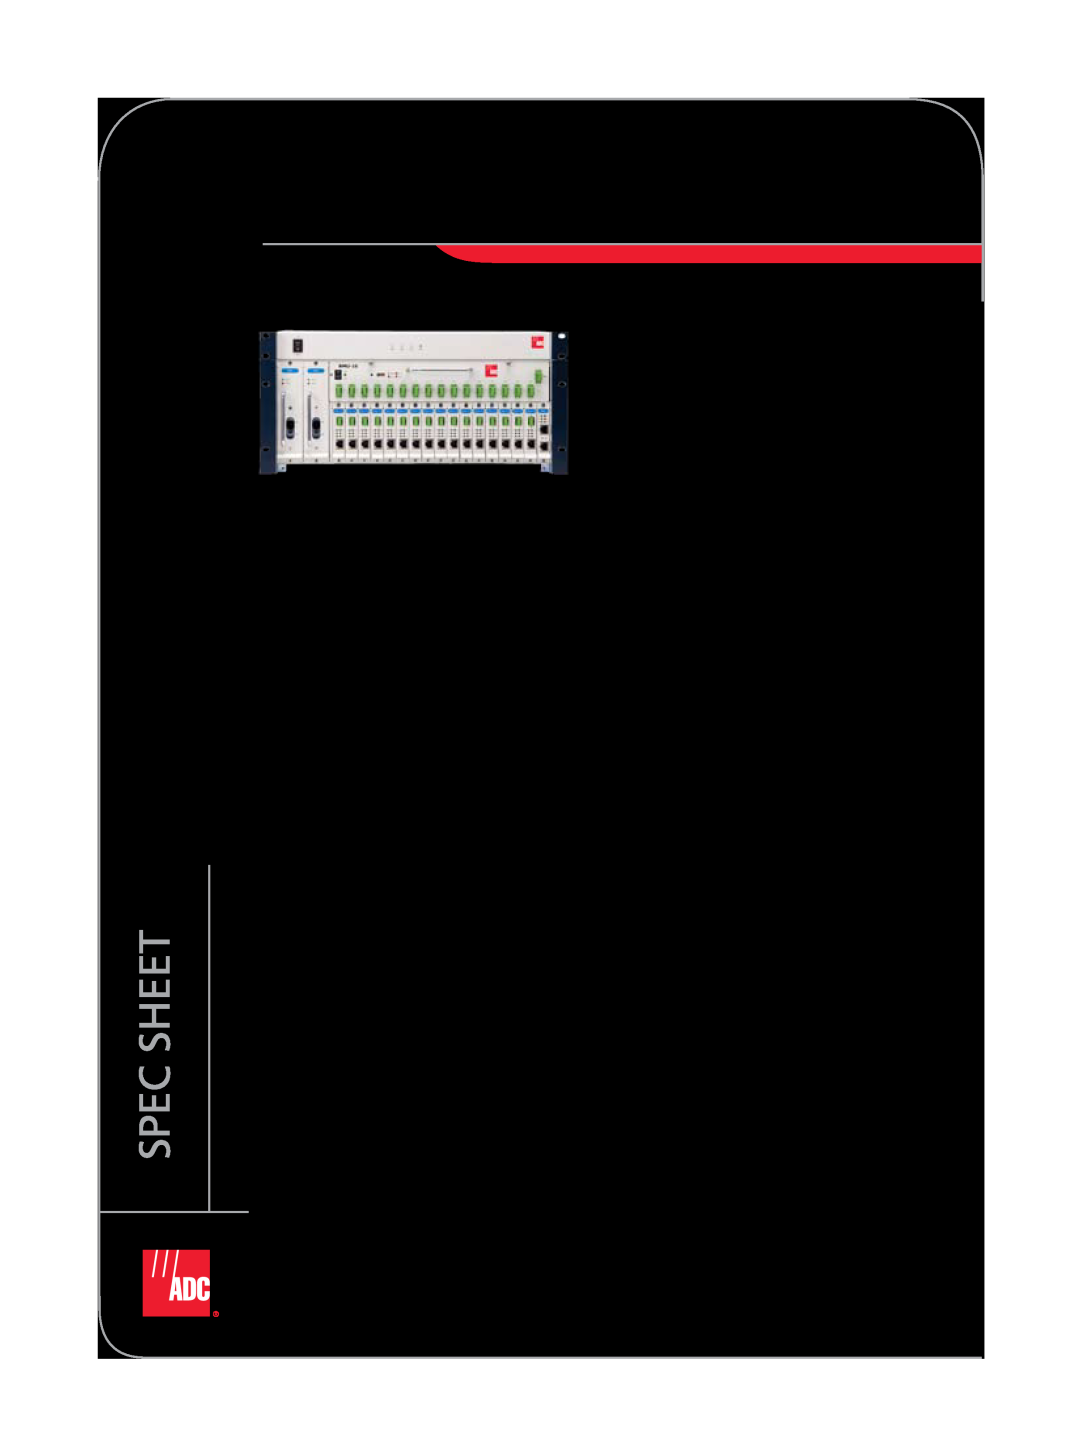 ADC PONy Express 16 manual PONλ Express, Universal Transport Platform for Access Networks, Features, Benefits, Spec Sheet 